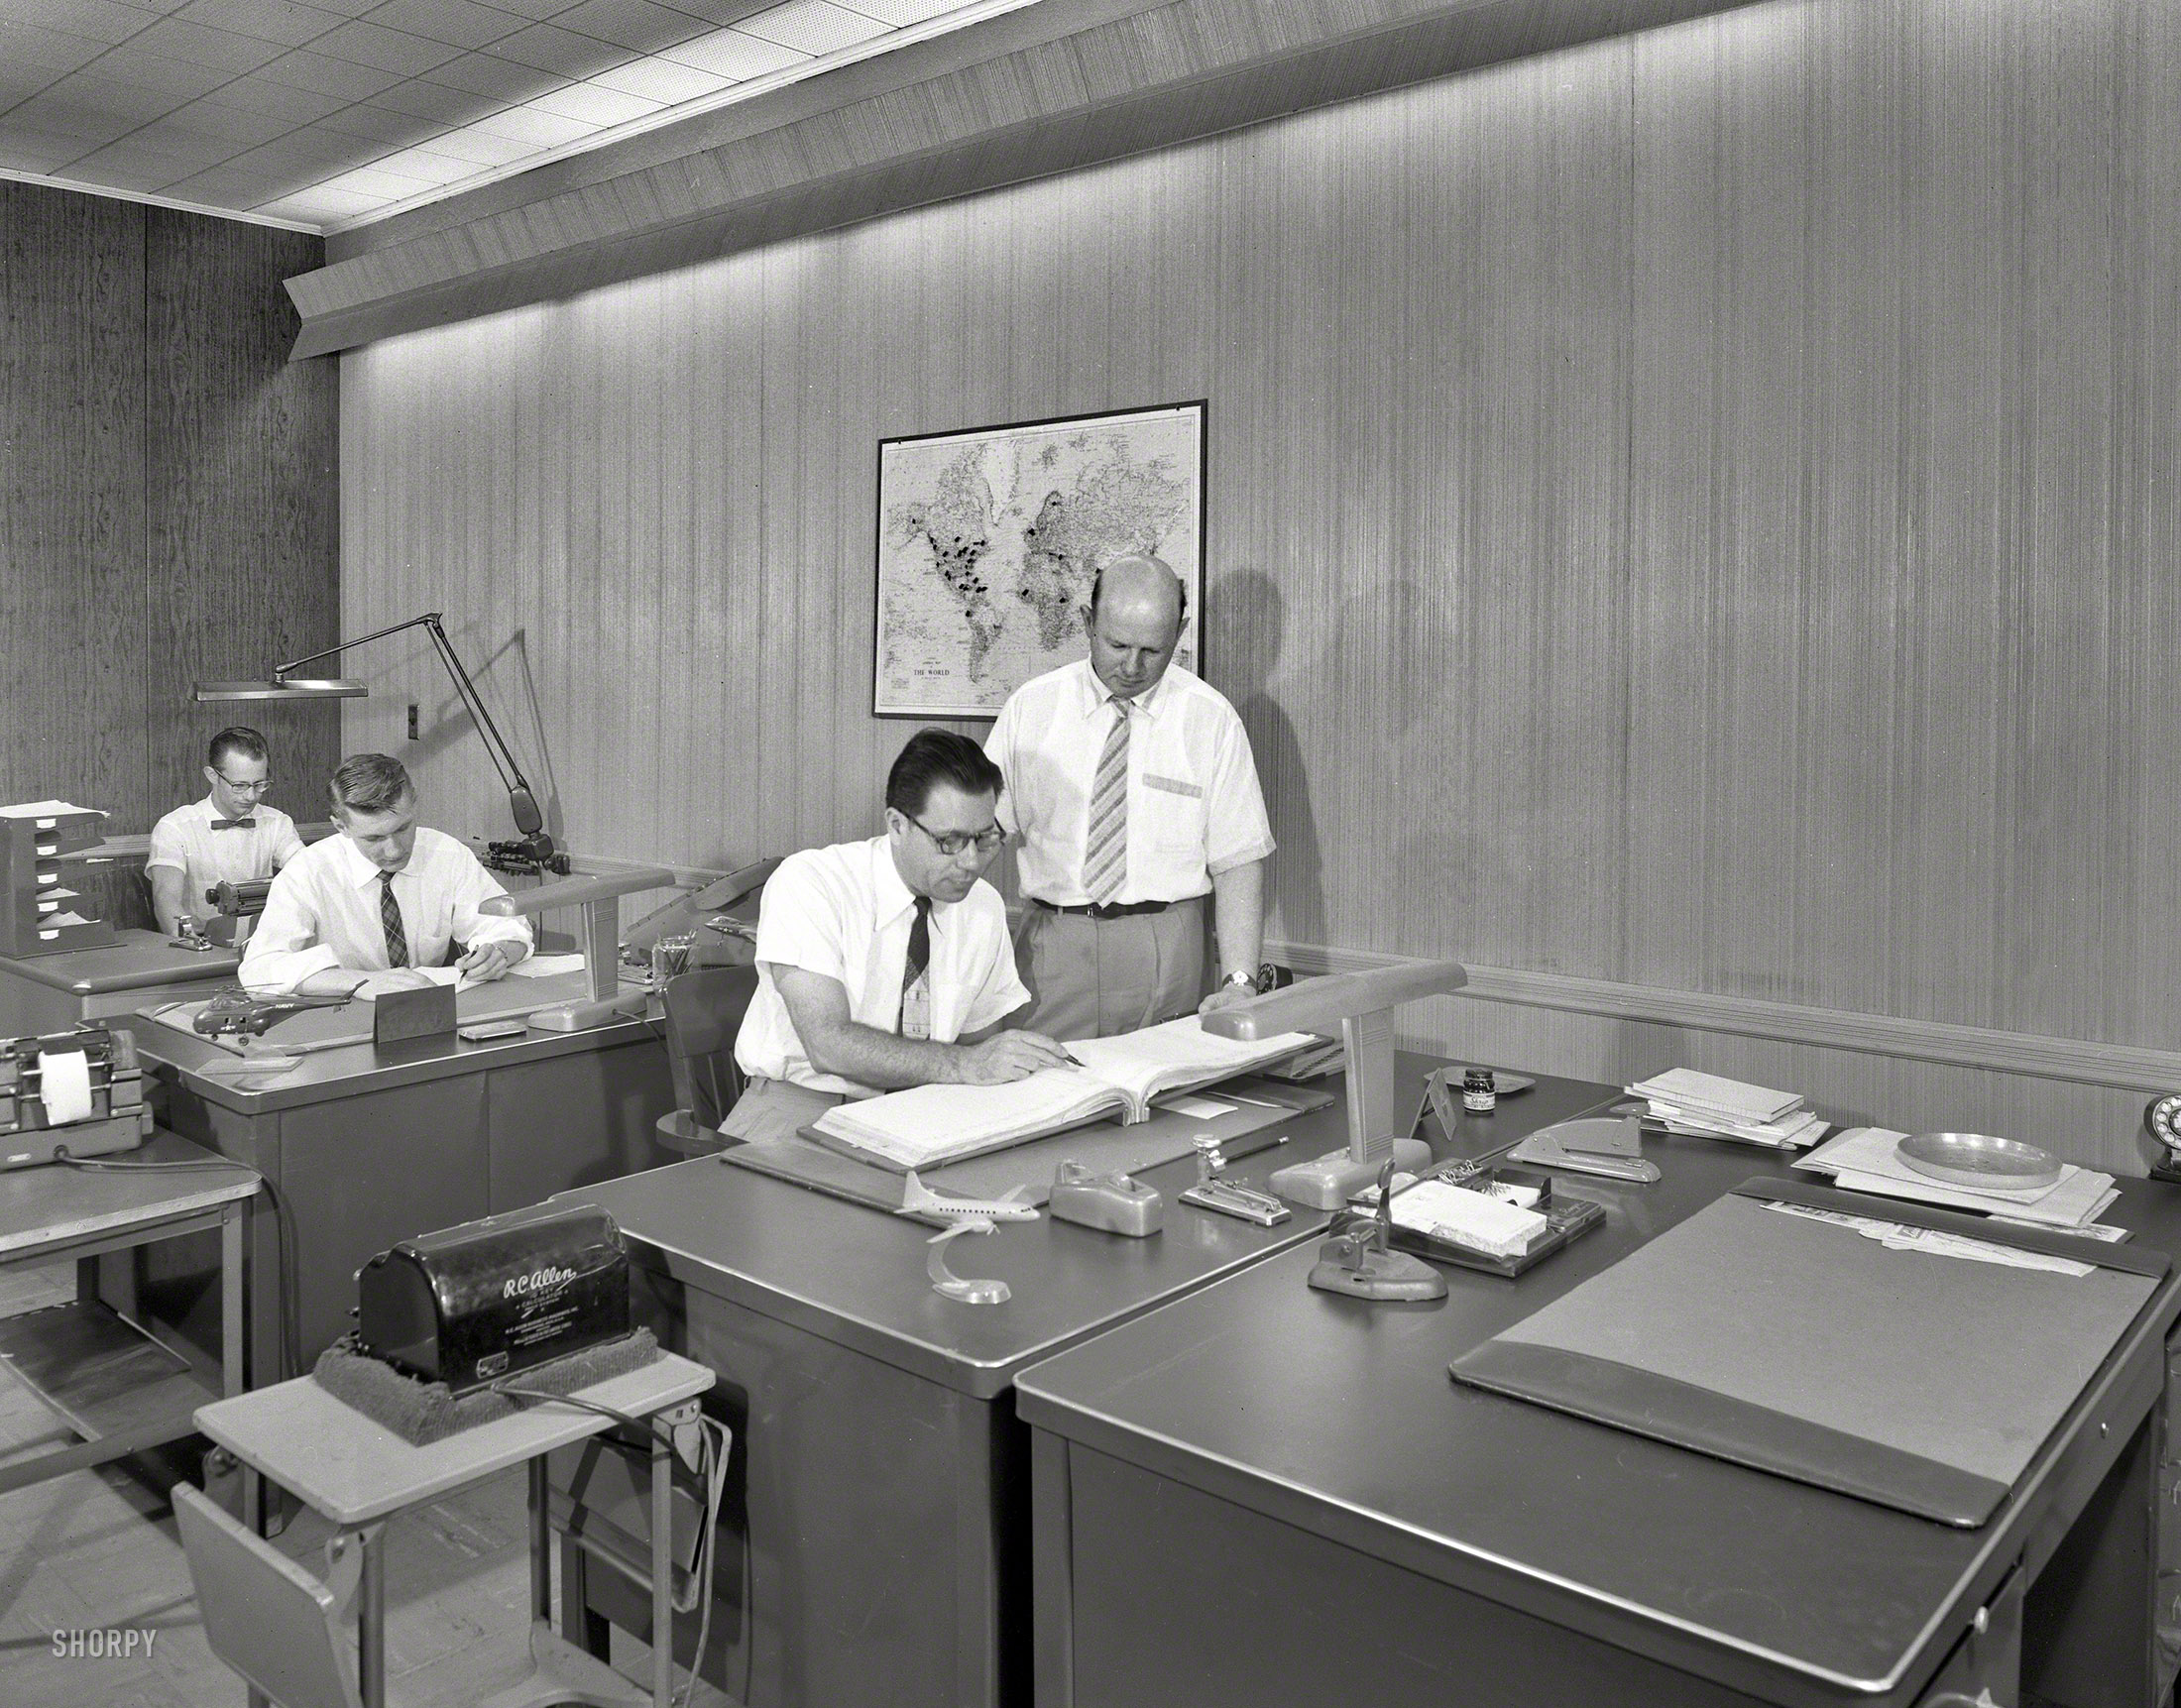 June 26, 1956. "Ledkote Products Co., Vernon Boulevard, Astoria, Long Island. Office accounting department. Corydon M. Johnson Co., client." Large-format acetate negative by Gottscho-Schleisner. View full size.